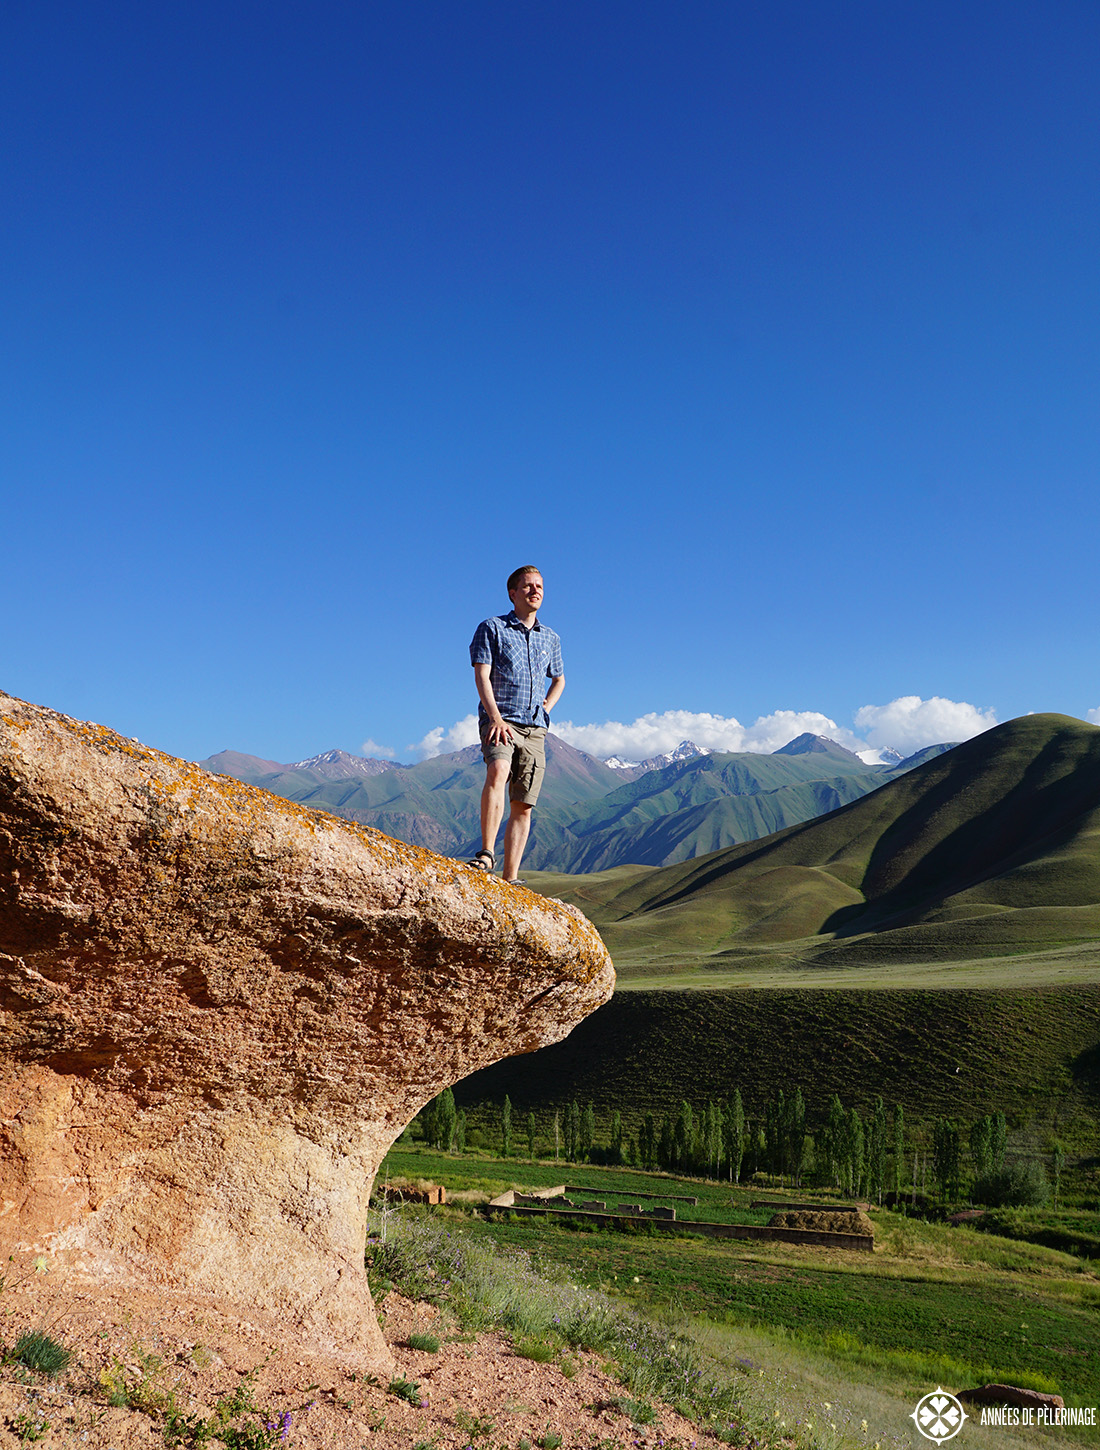 hiking in the high mountains was my favorite thing to do in Kyrgyzstan